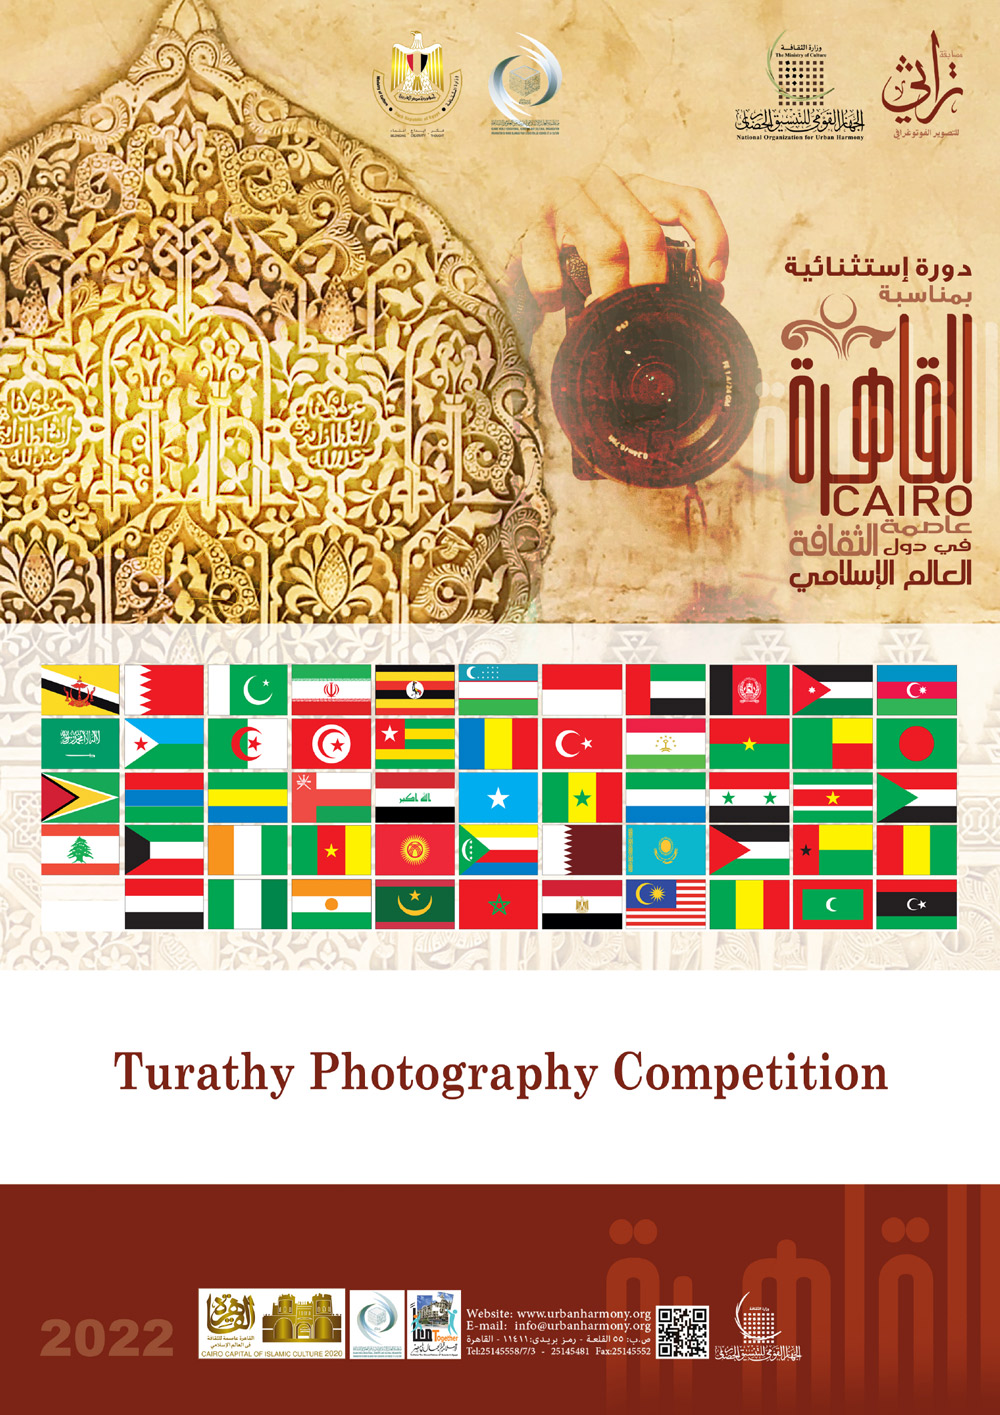 Turathy Photography Competition